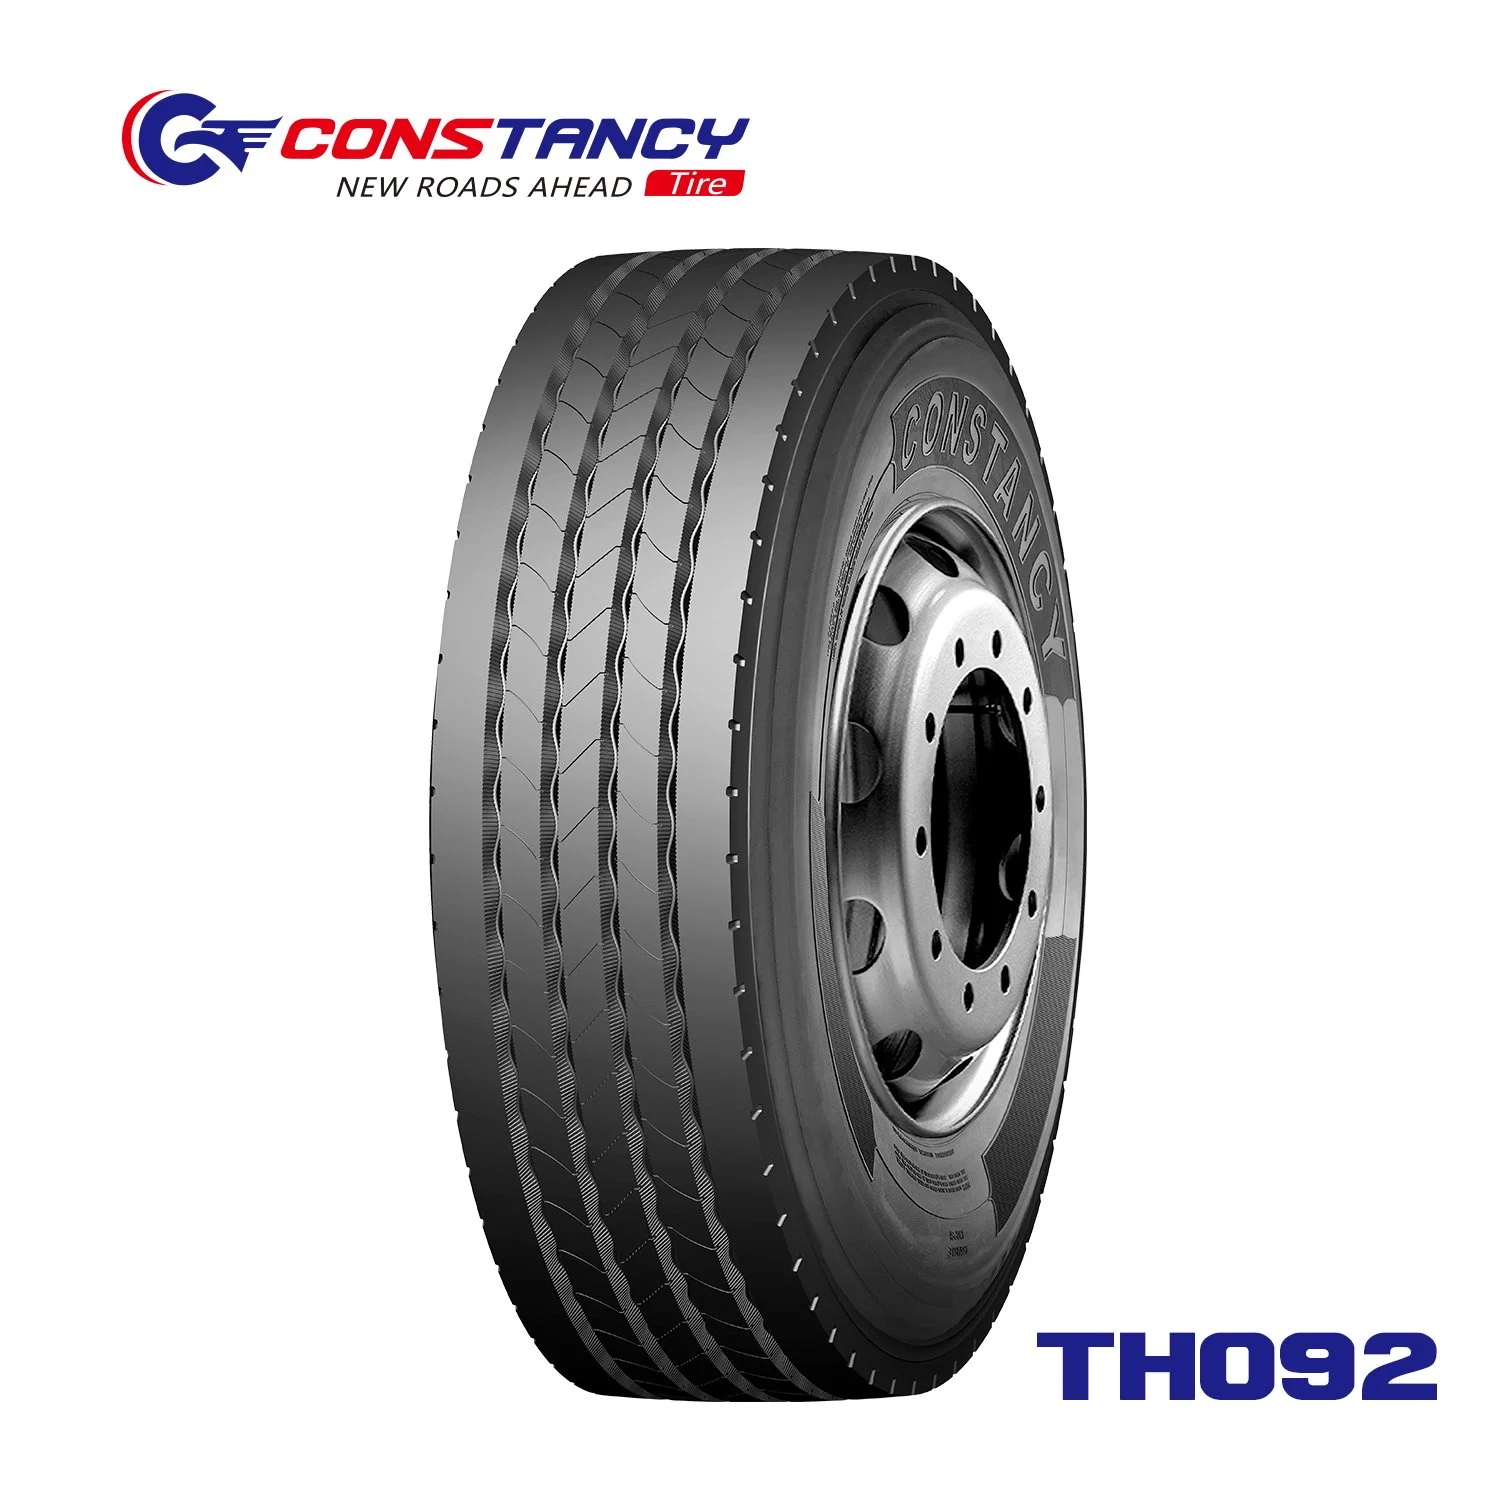 Constancy Truck Bus Tyre, TBR, Light Truck Tyre, Steer and Trailer Position Tyre Th092 12r22.5